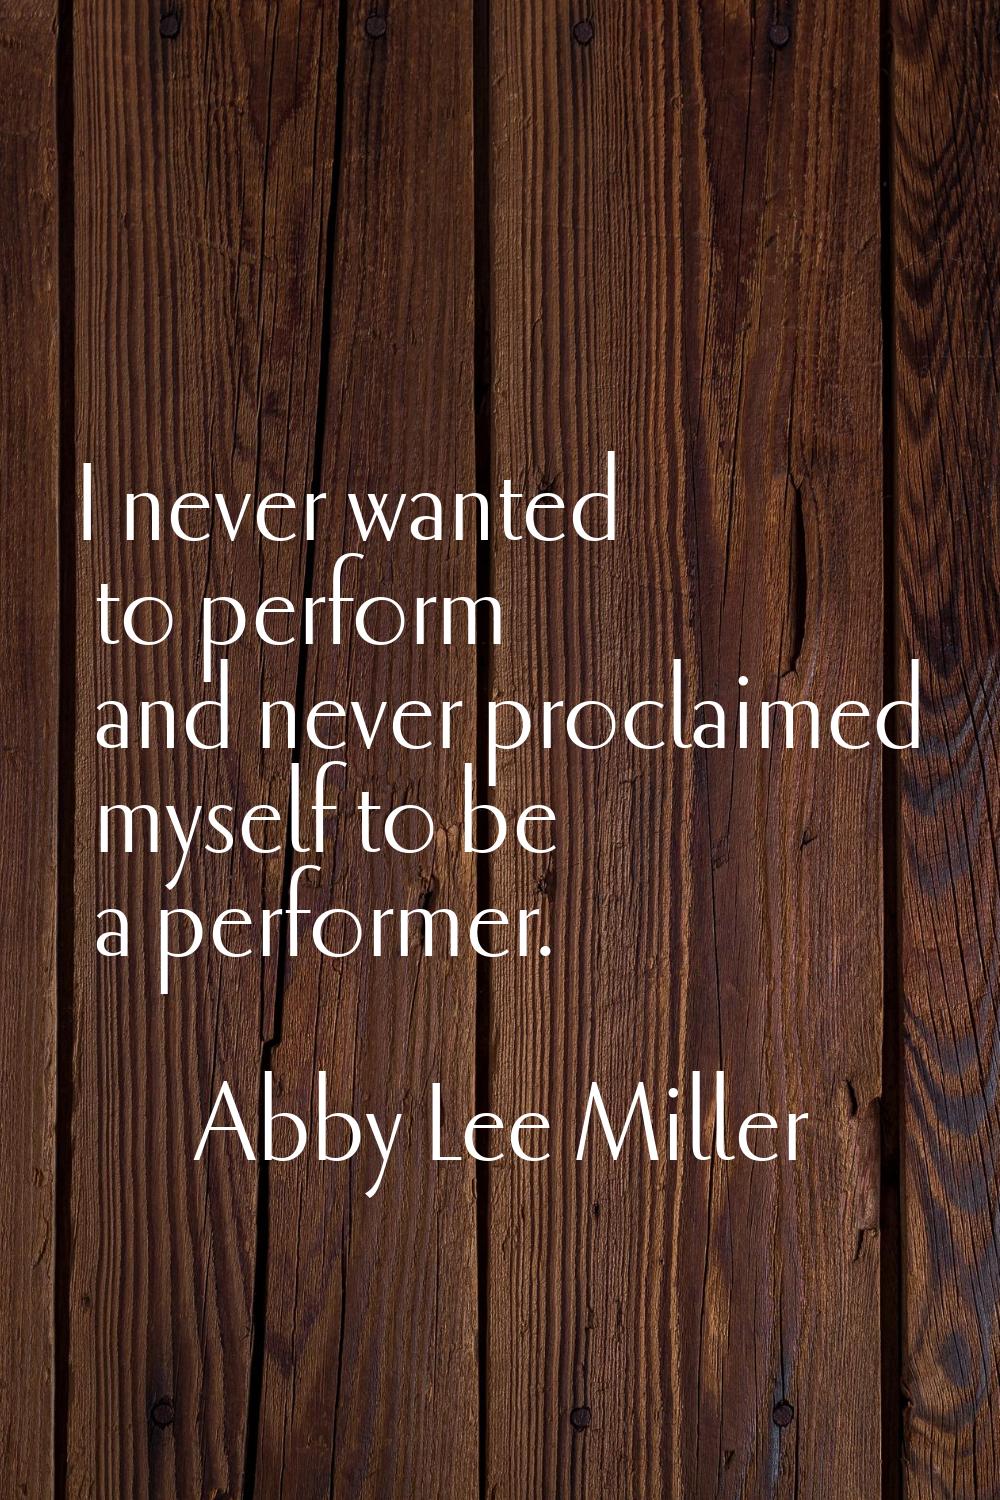 I never wanted to perform and never proclaimed myself to be a performer.